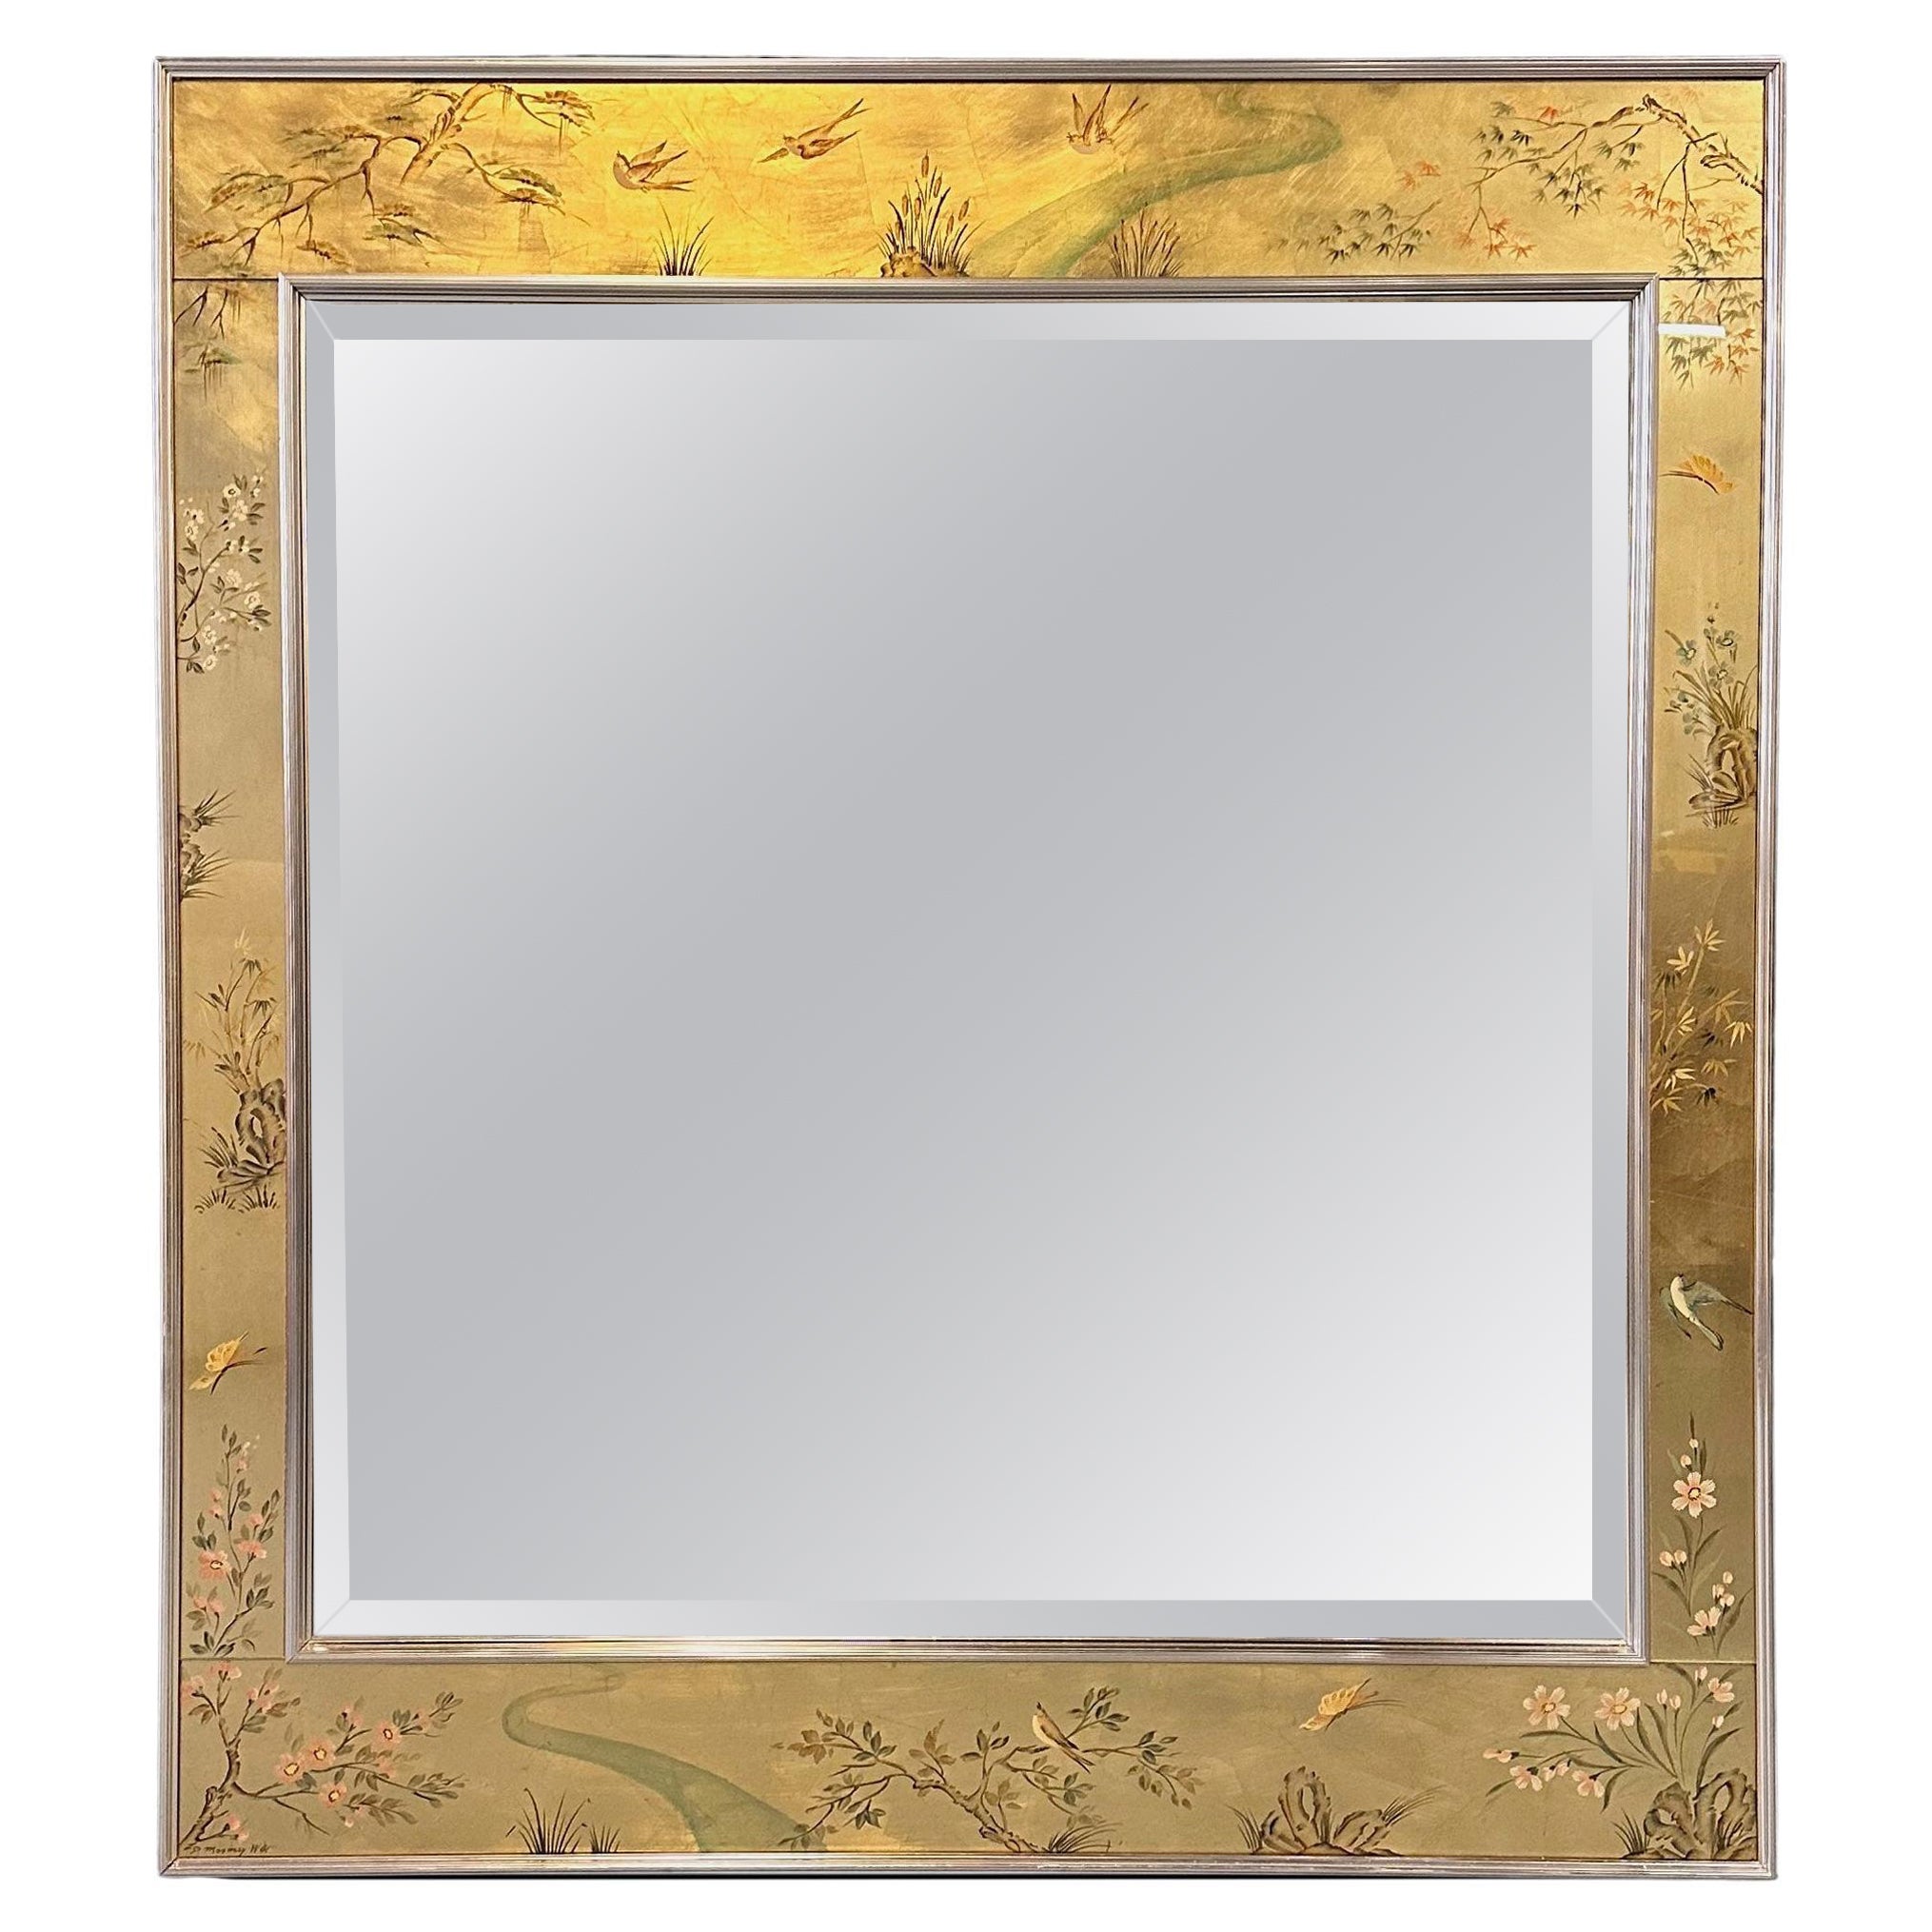 La Barge Square Eglomise Wall Mirror with Chinoiserie Natural Scene Mid Century For Sale